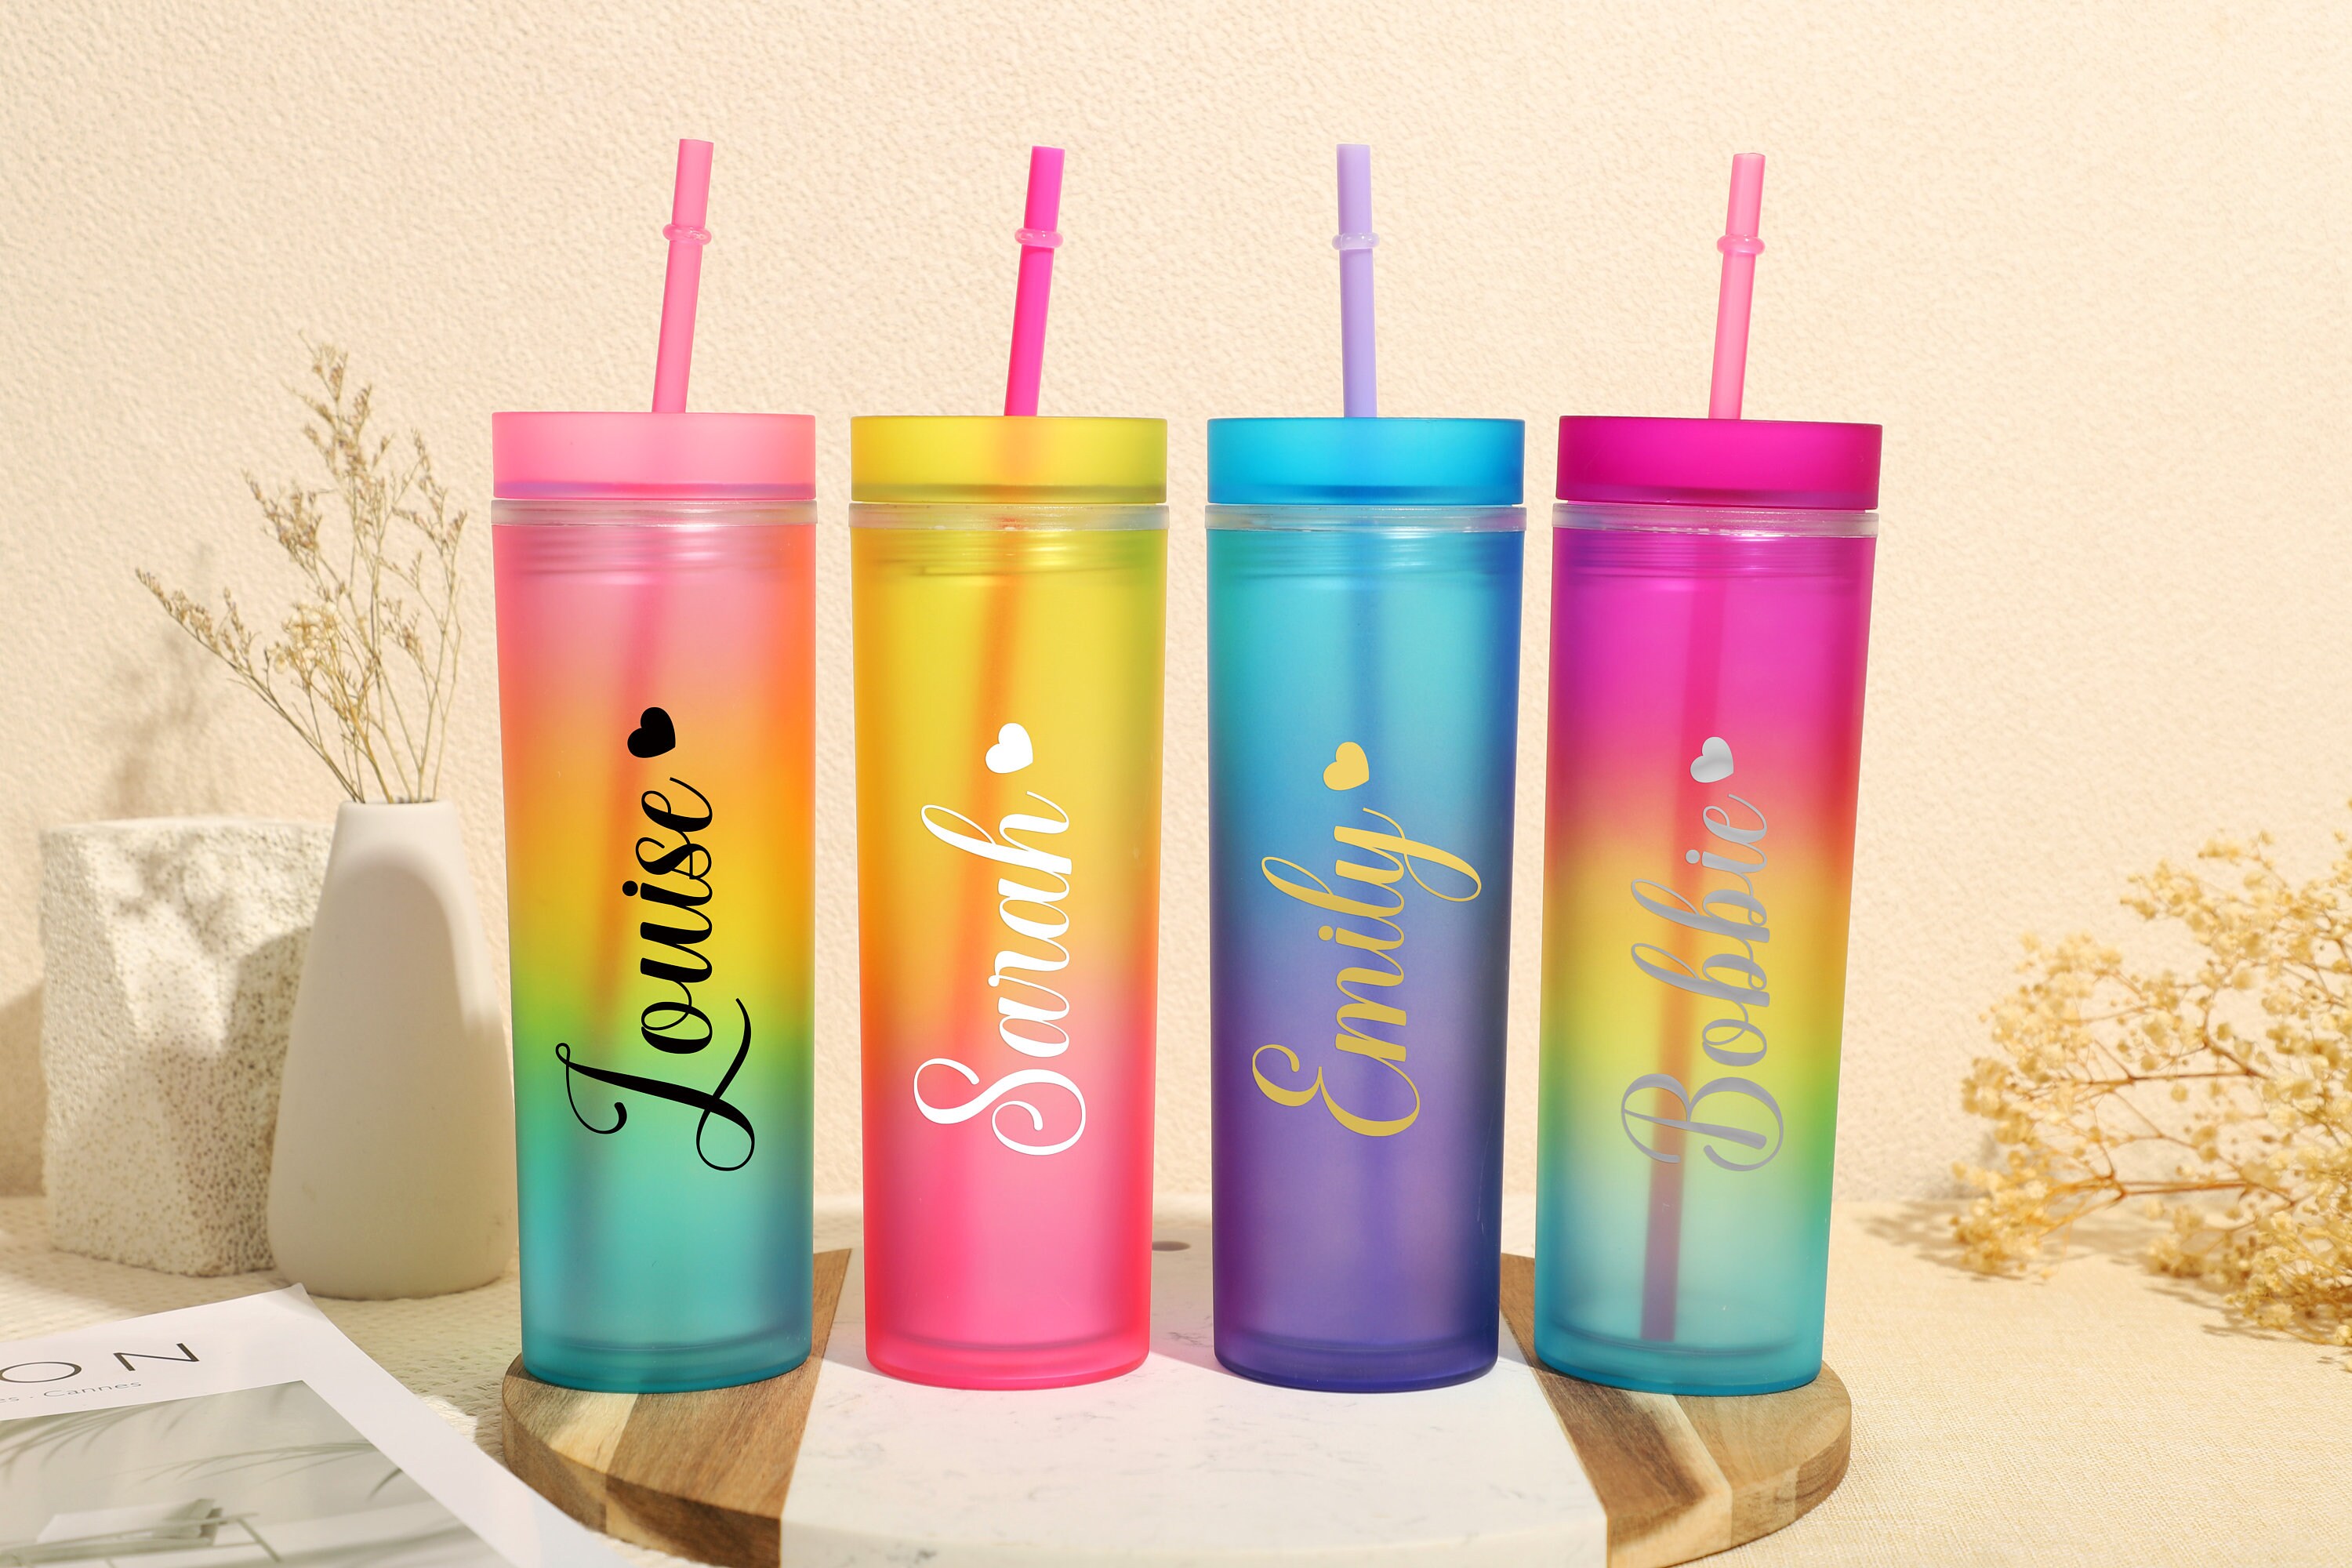 Acrylic 32 Oz XL Classic Tumbler With Lid and Straw Mockup Add